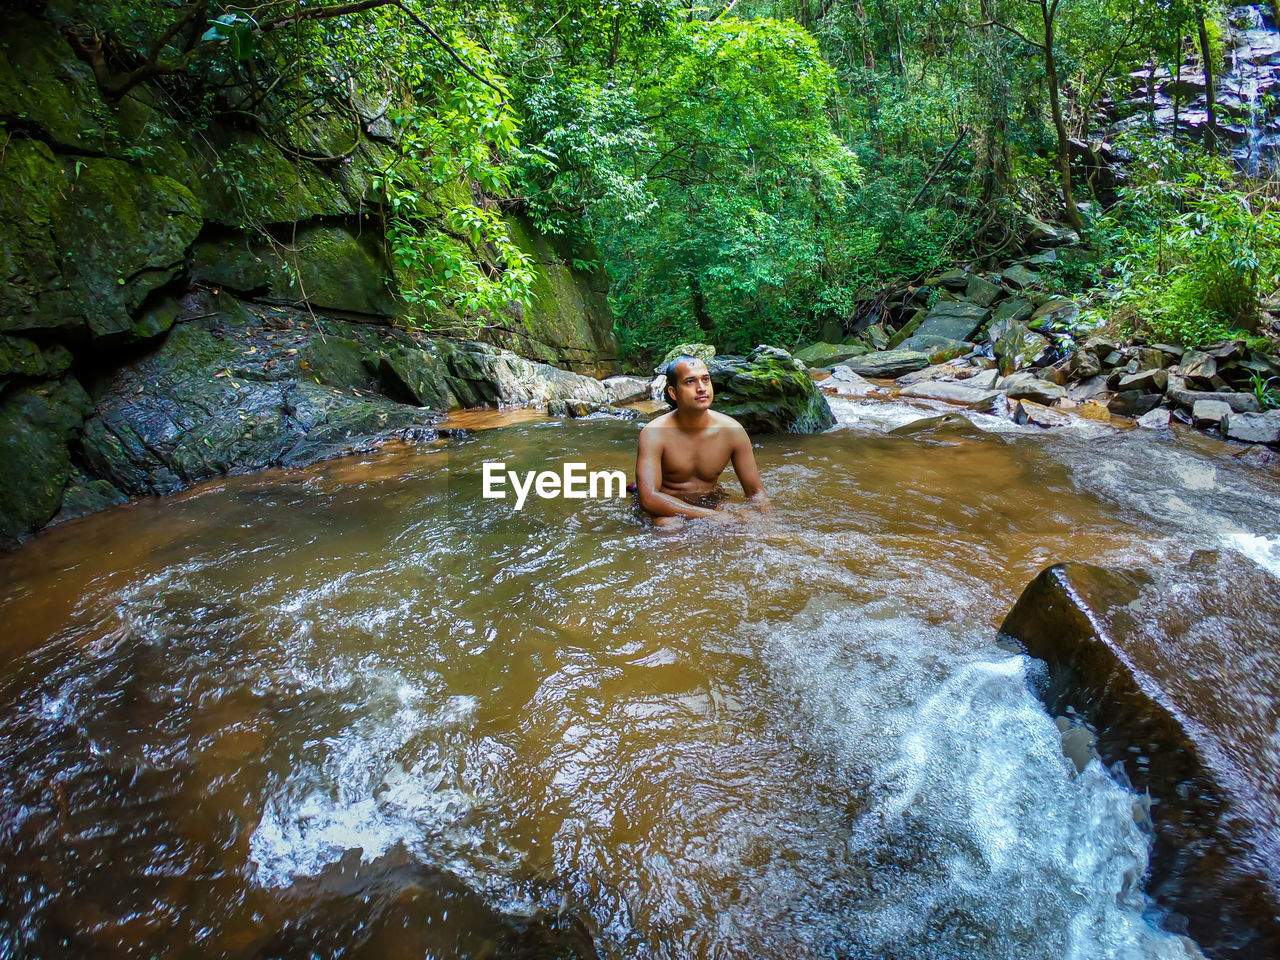 Man bathing in natural waterfall in forests at morning from different angle